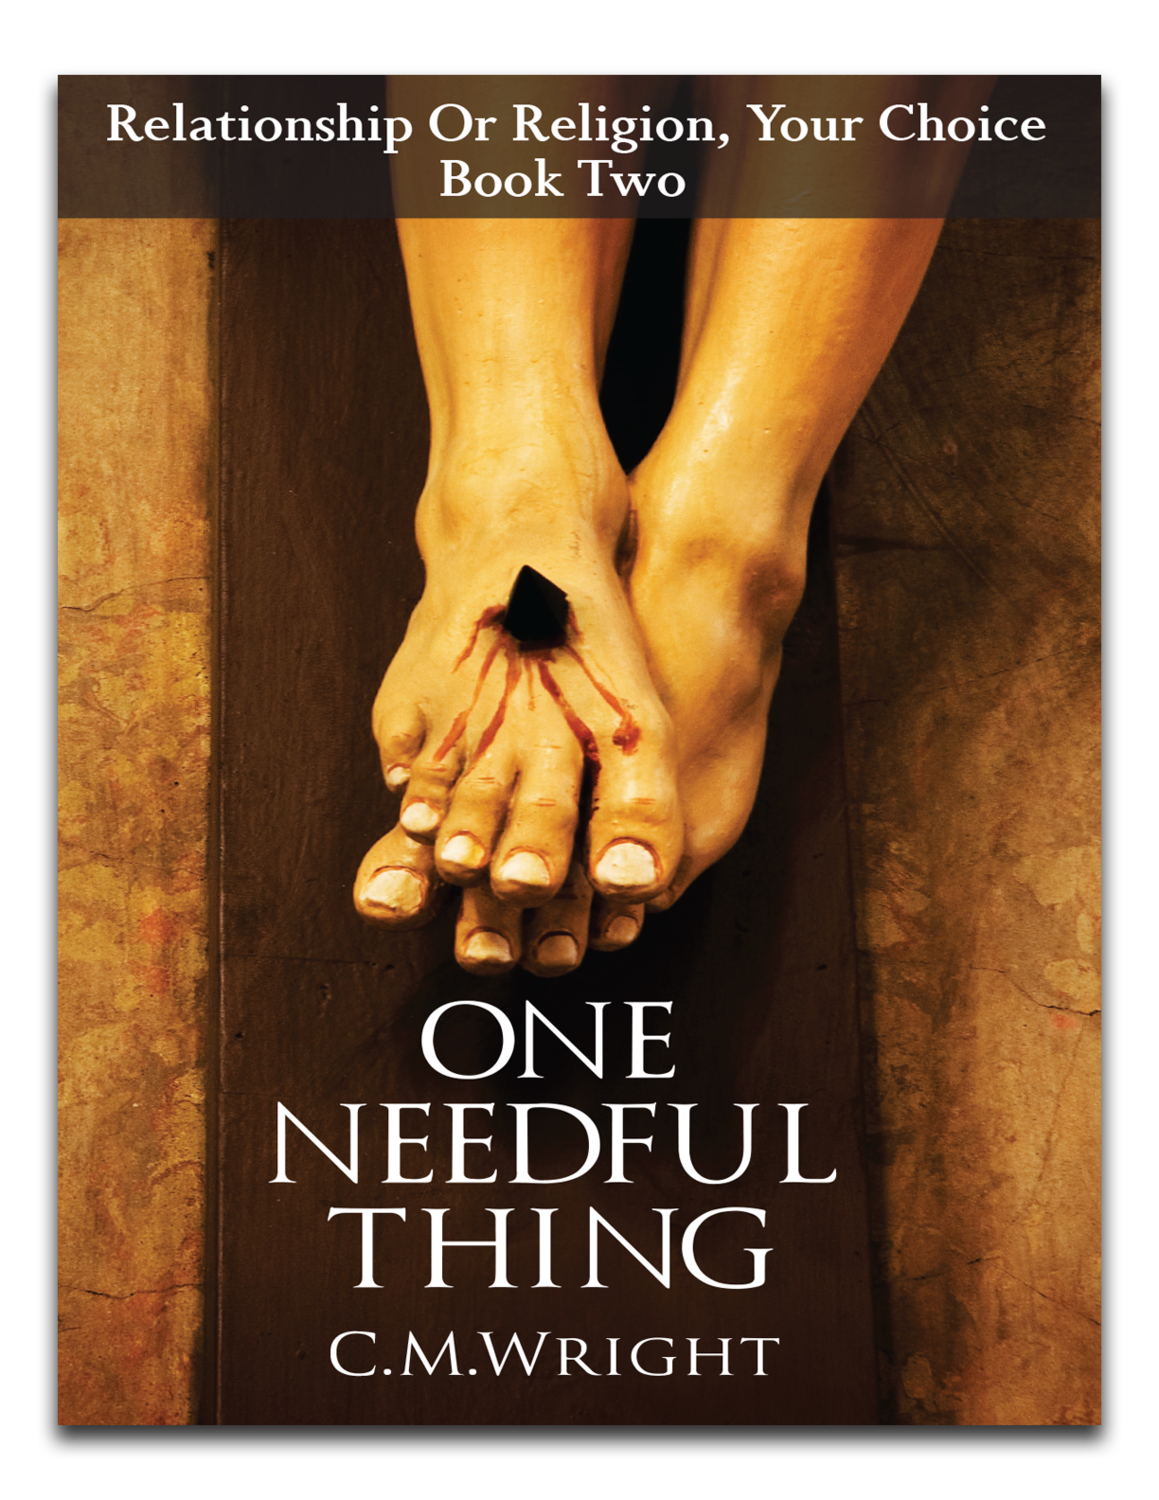 One Needful Thing by C.M. Wright